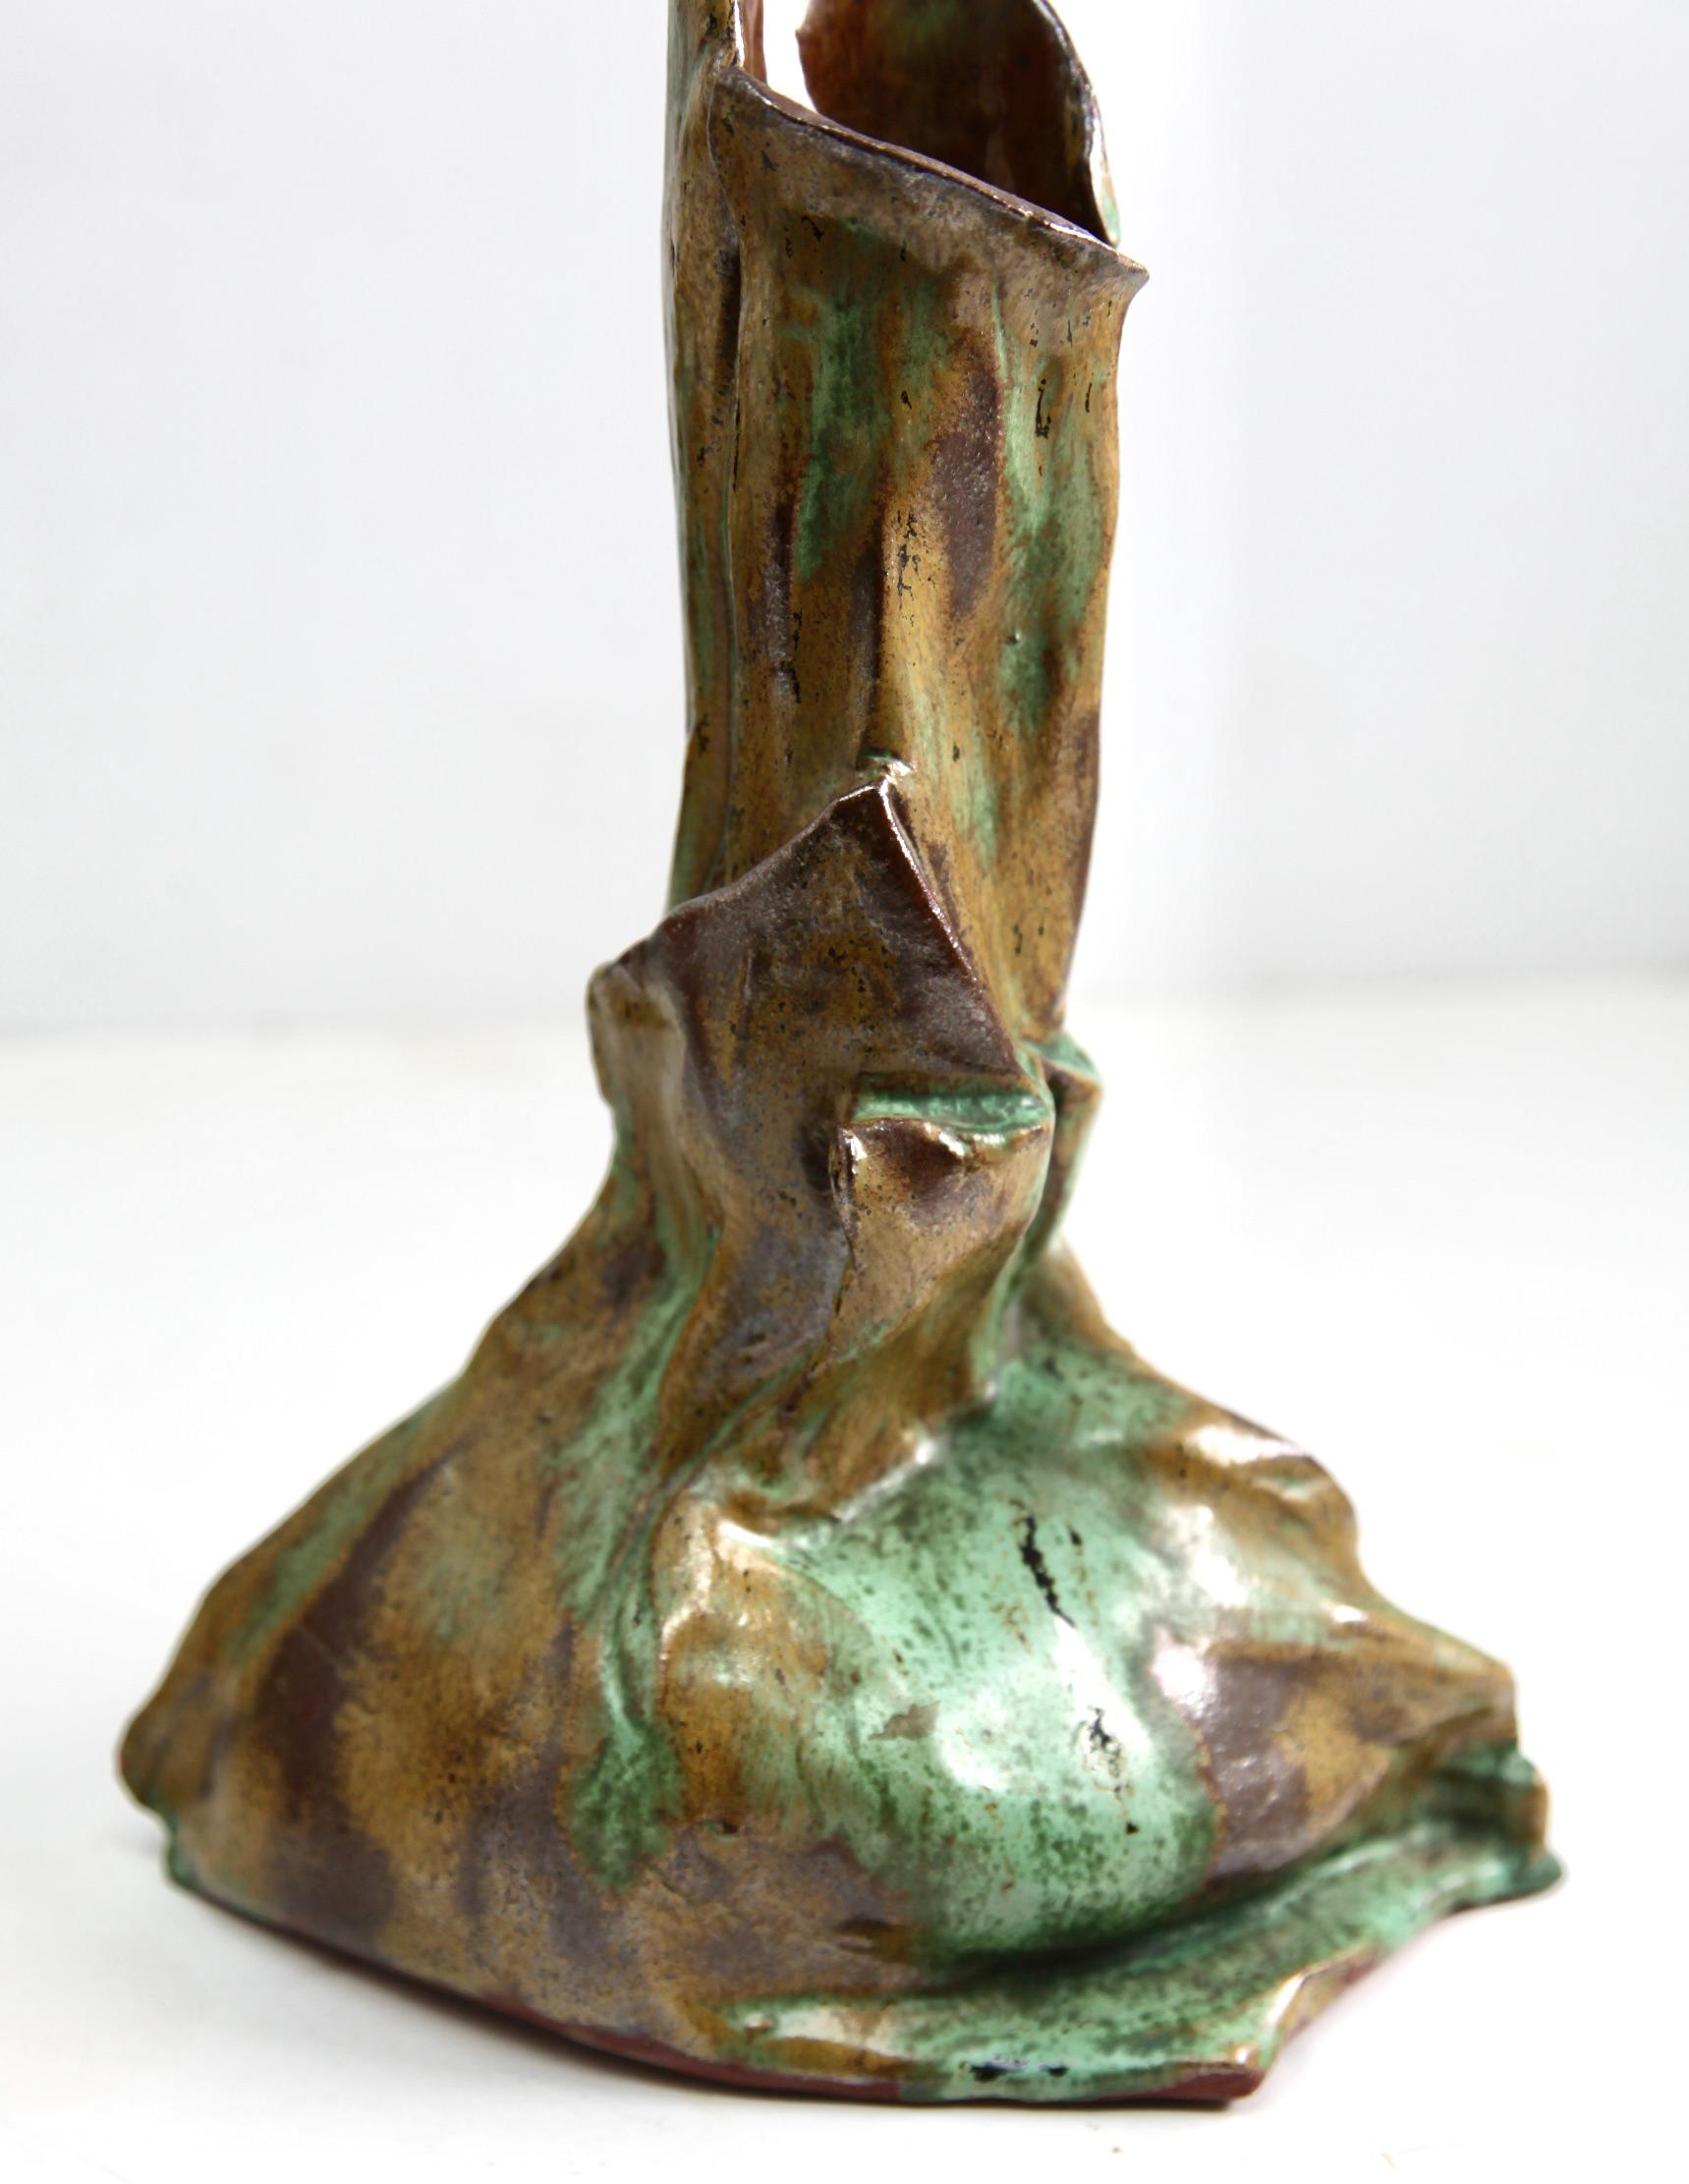 Oraganis Ceramic Vase Beautiful Glaze in Shades of Brown and Green, circa 1930 For Sale 2